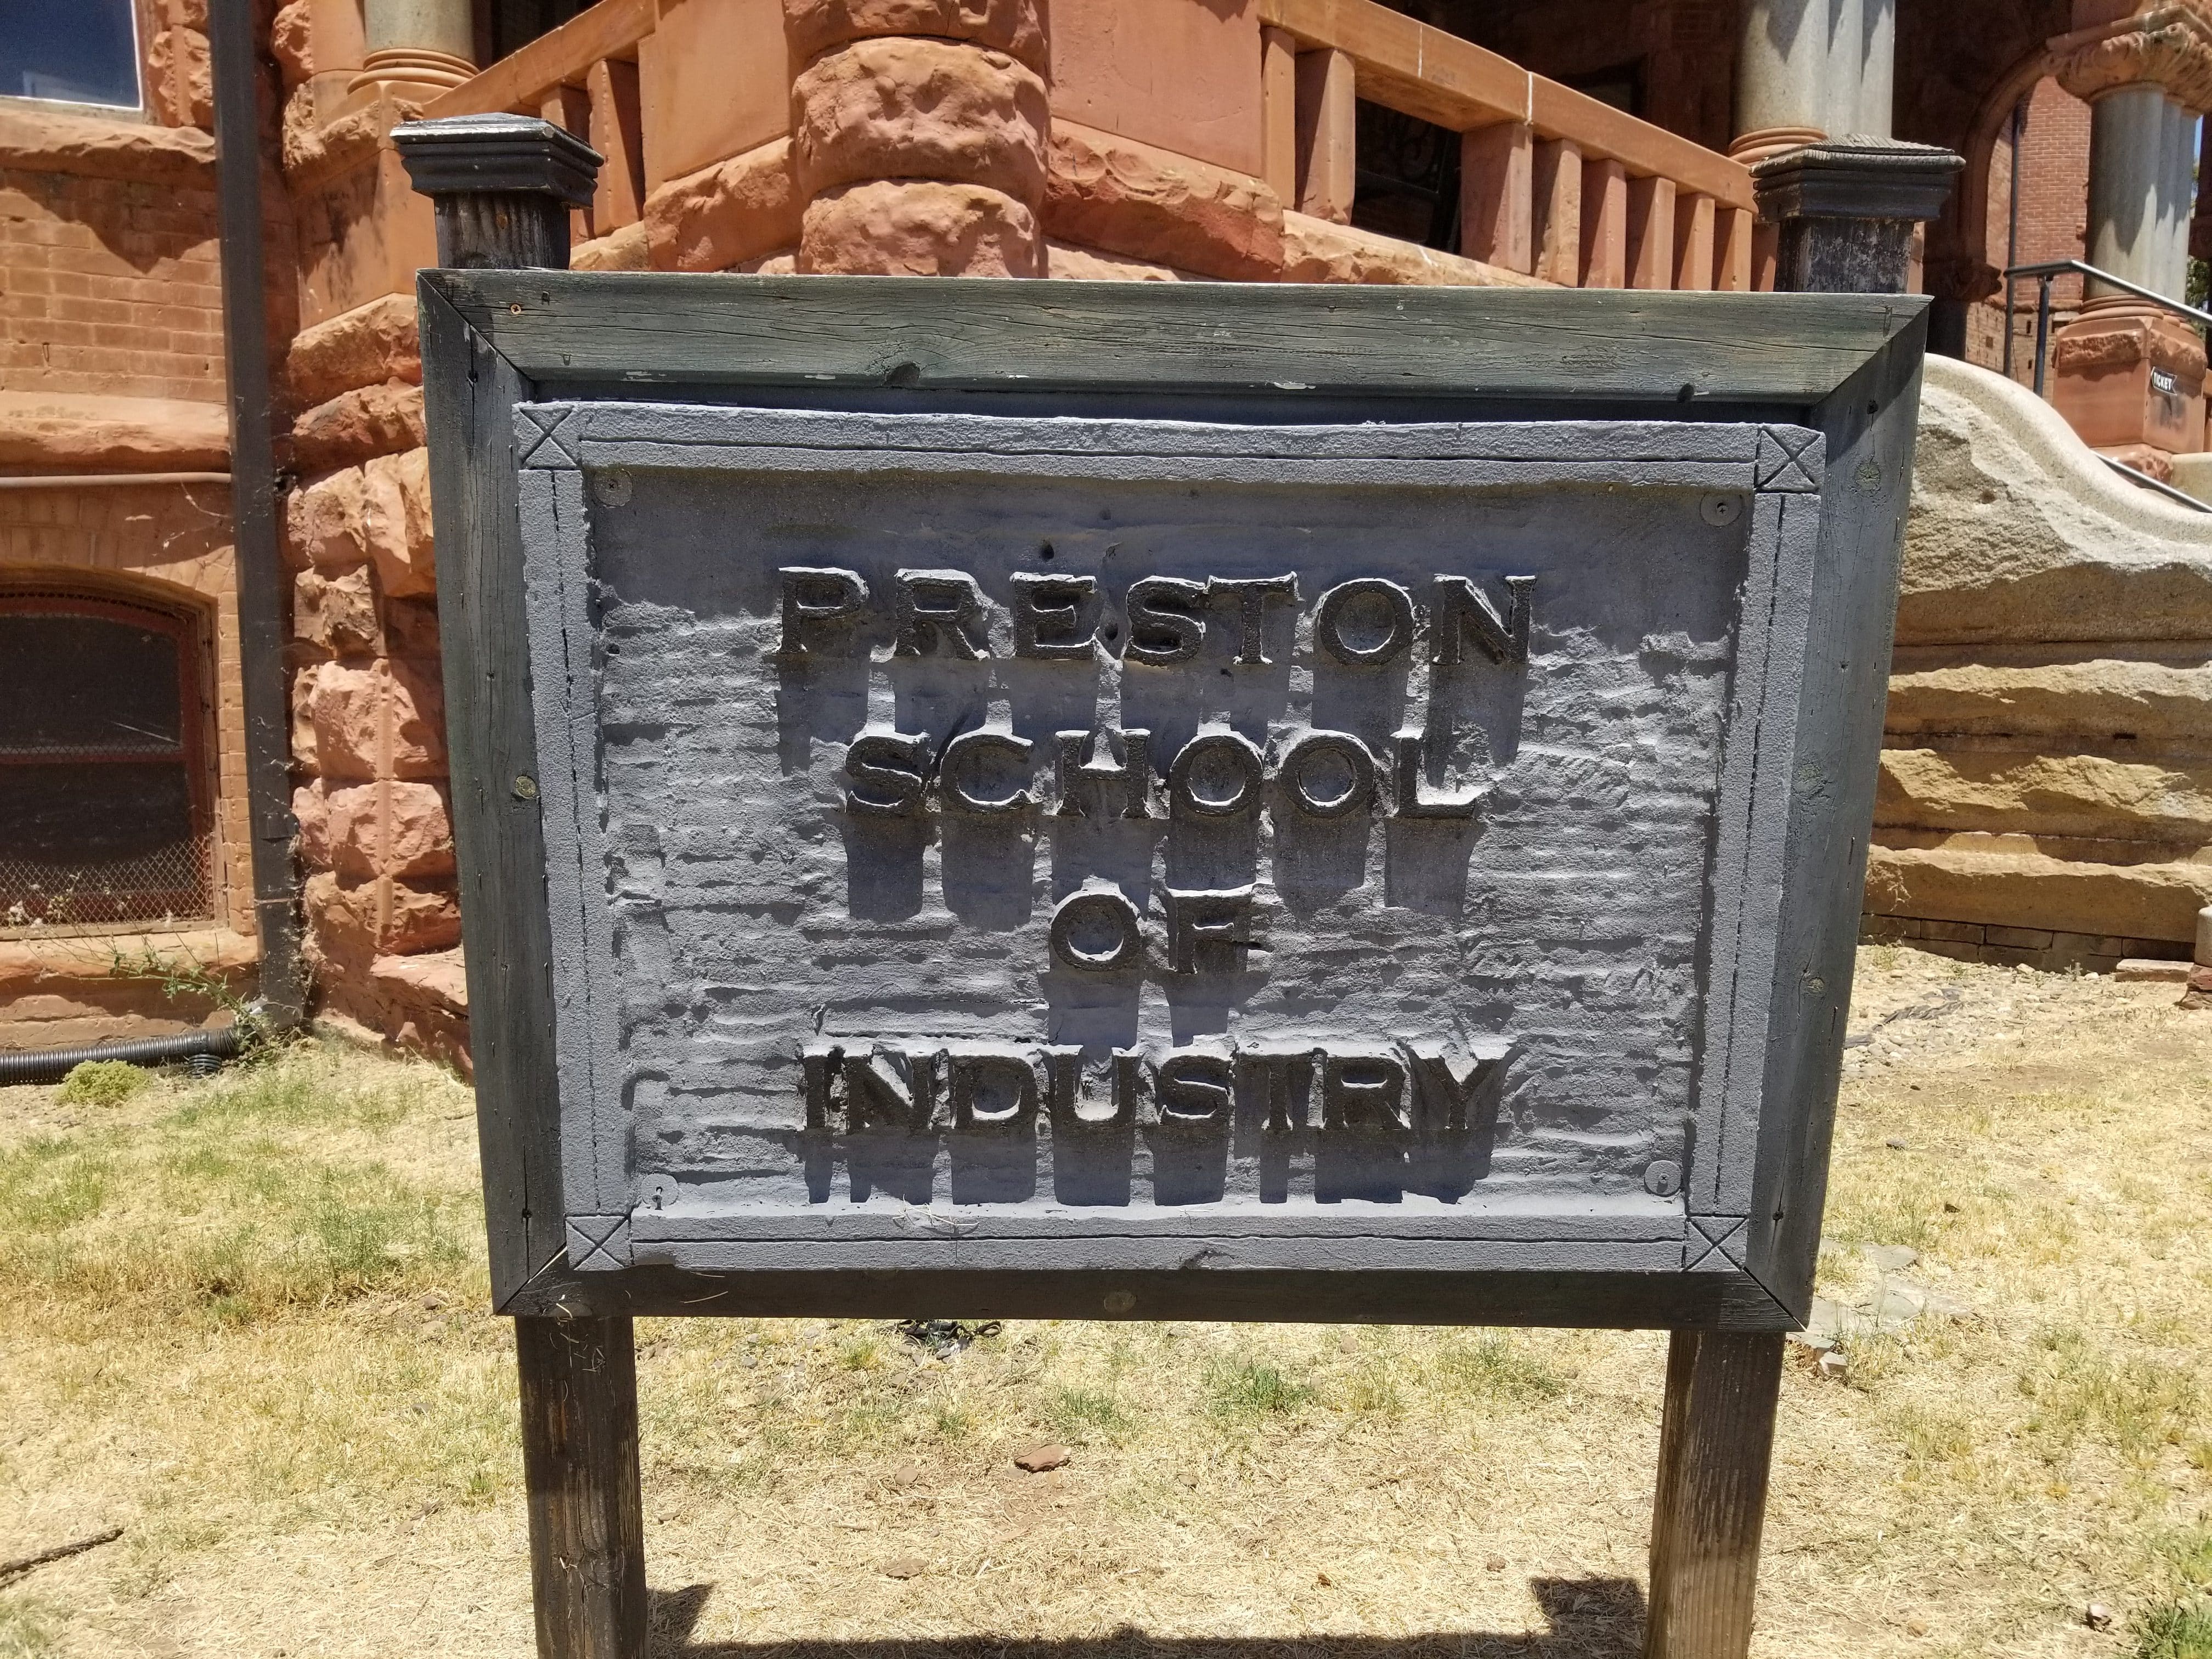 "Preston School of Industry" wooden sign outside of building